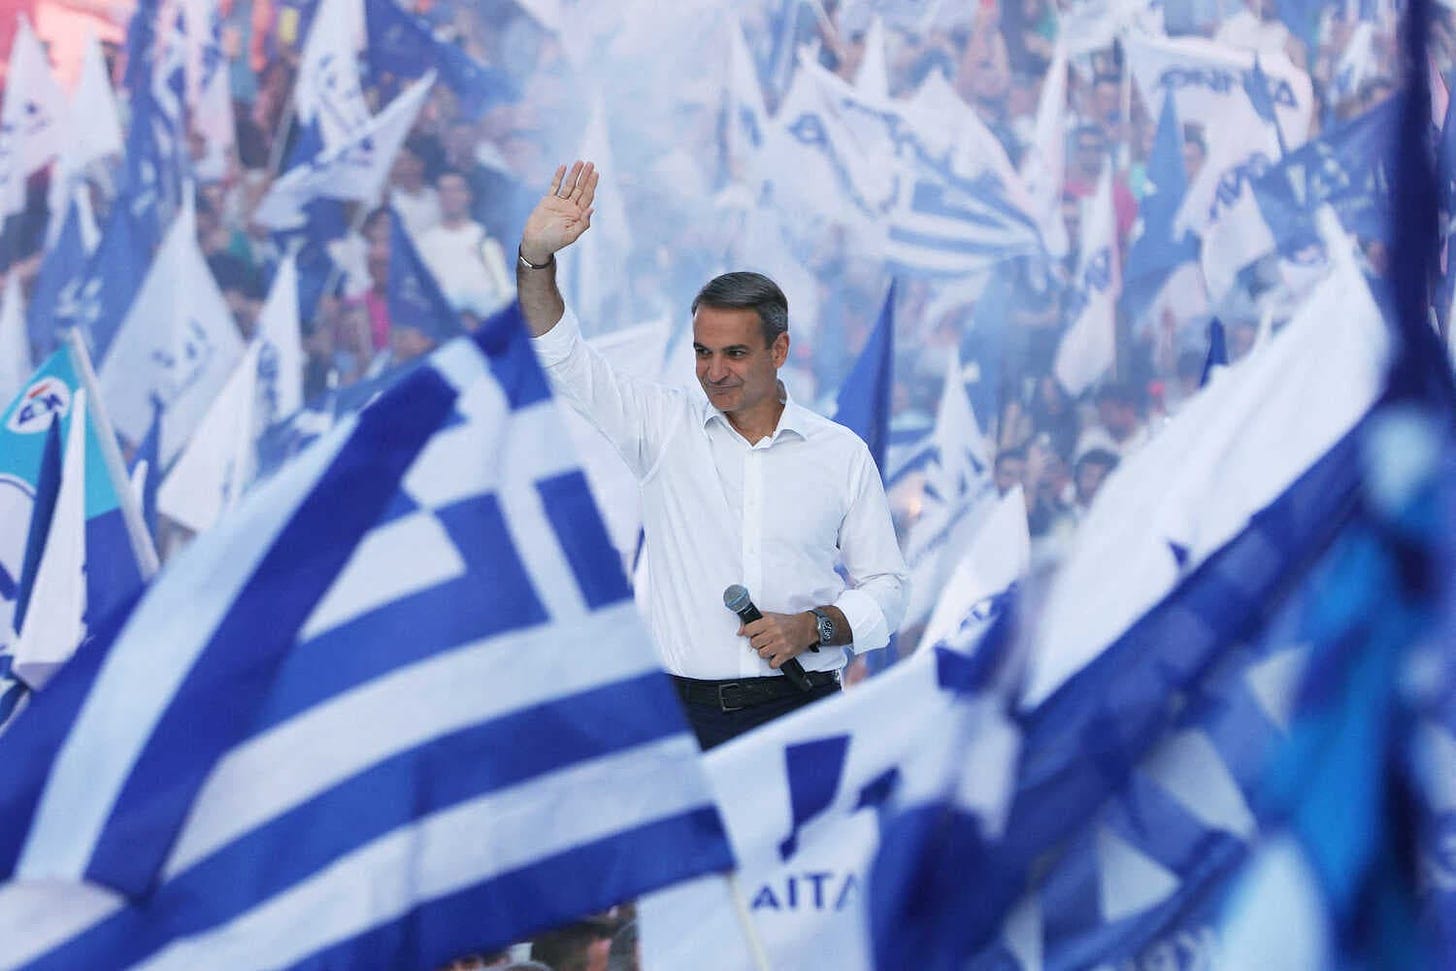 A man in a white dress shirt waves to a crowd while holding a microphone amid a sea of blue and white flags.